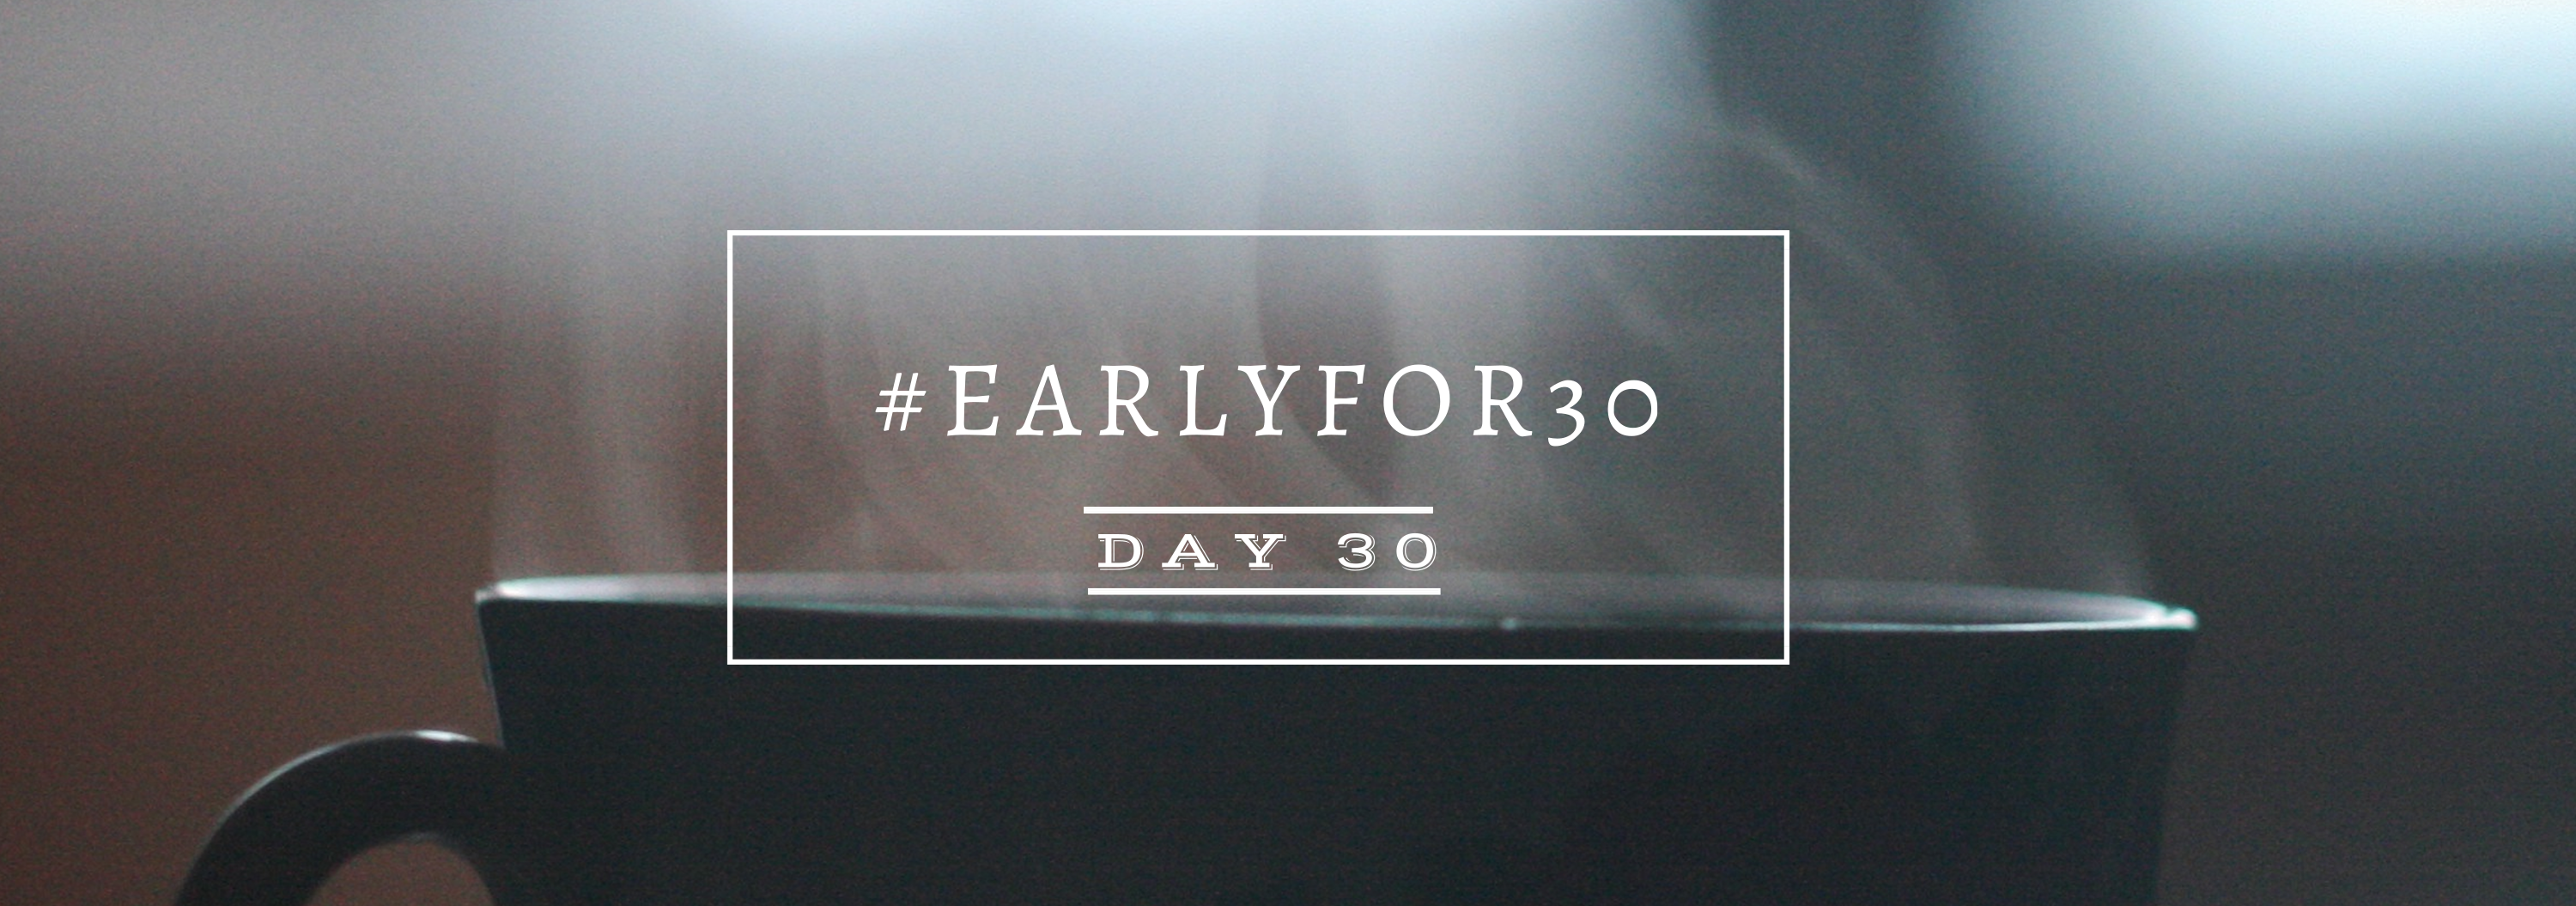 #Earlyfor30 – Day 30